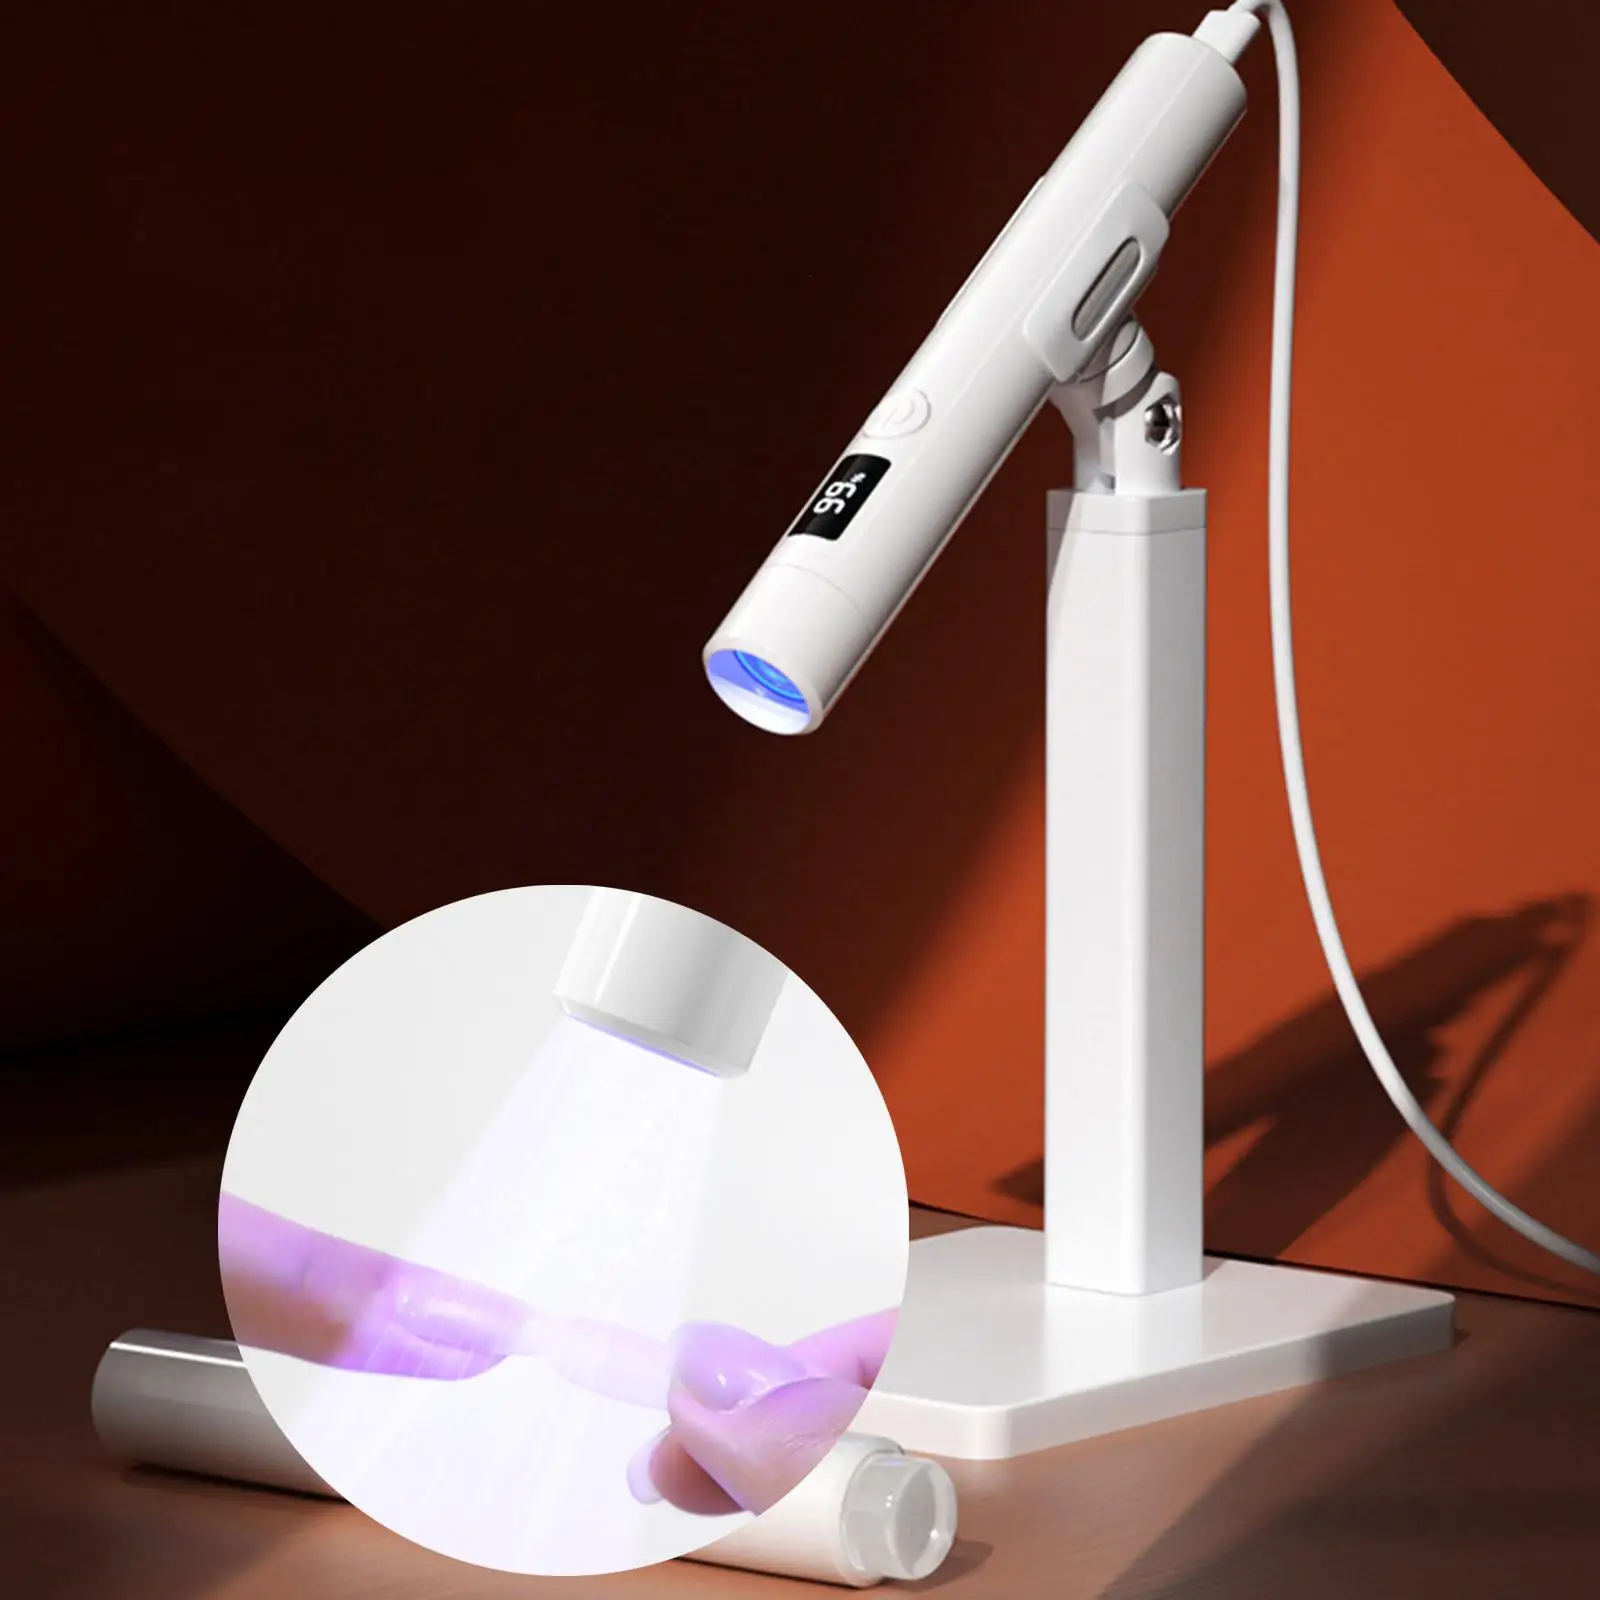 Mini Nails Dryer Lamp Handheld LED Nail Light 2 Speed with Bracket for Salon Business Trips Travel Use Nail Art Tool